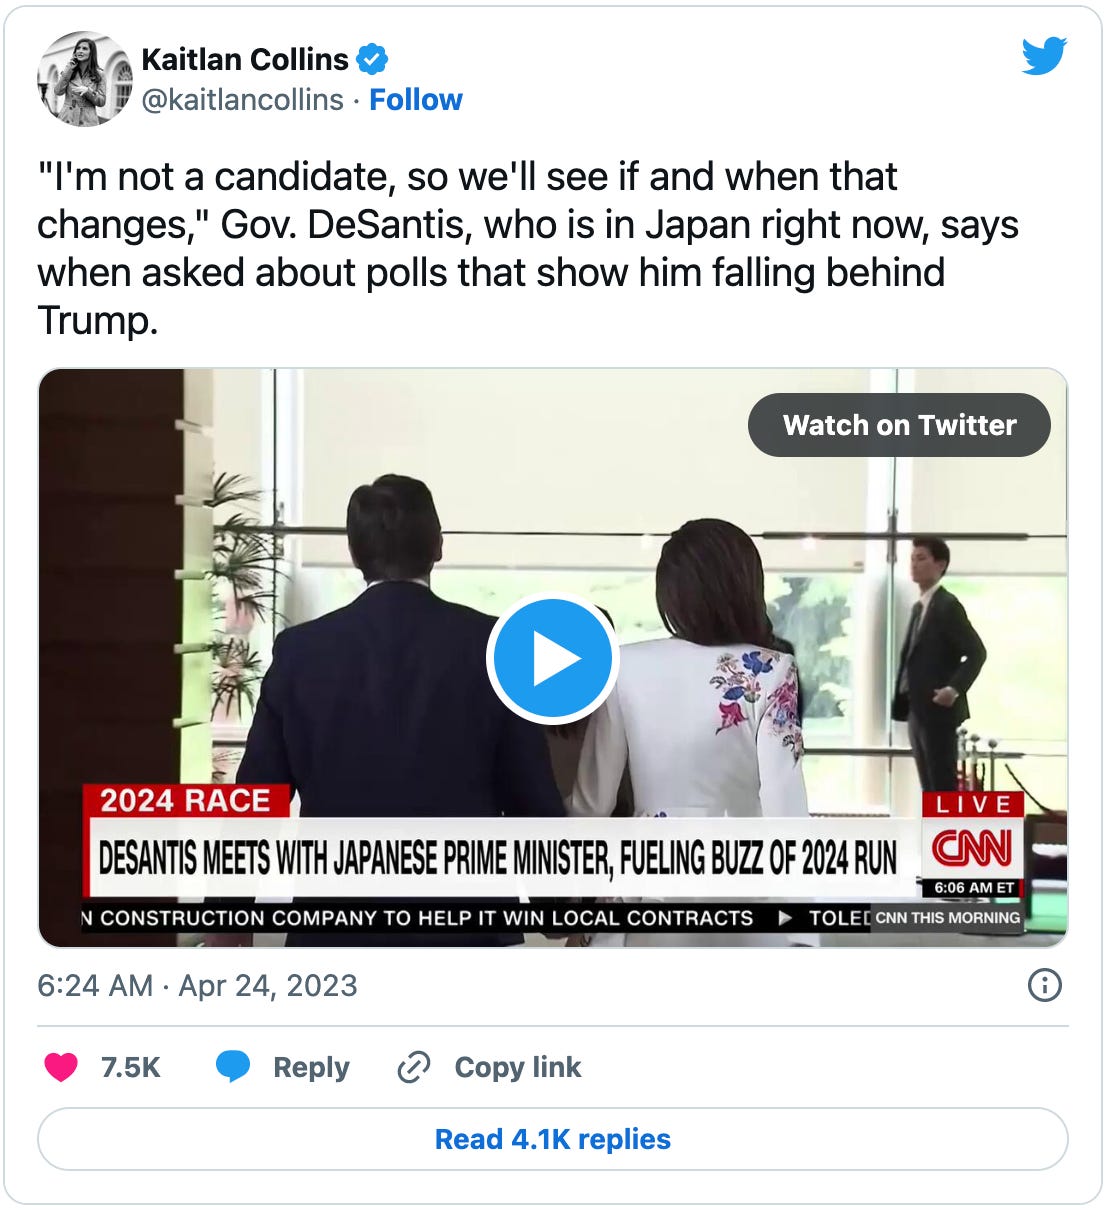 Tweet by Kaitlan Collins: “‘I'm not a candidate, so we'll see if and when that changes,’ Gov. DeSantis, who is in Japan right now, says when asked about polls that show him falling behind Trump.” with an embedded video of DeSantis actually saying that and believe me, you should watch it. You know I wouldn’t tell you to do that without a very good reason, right? 